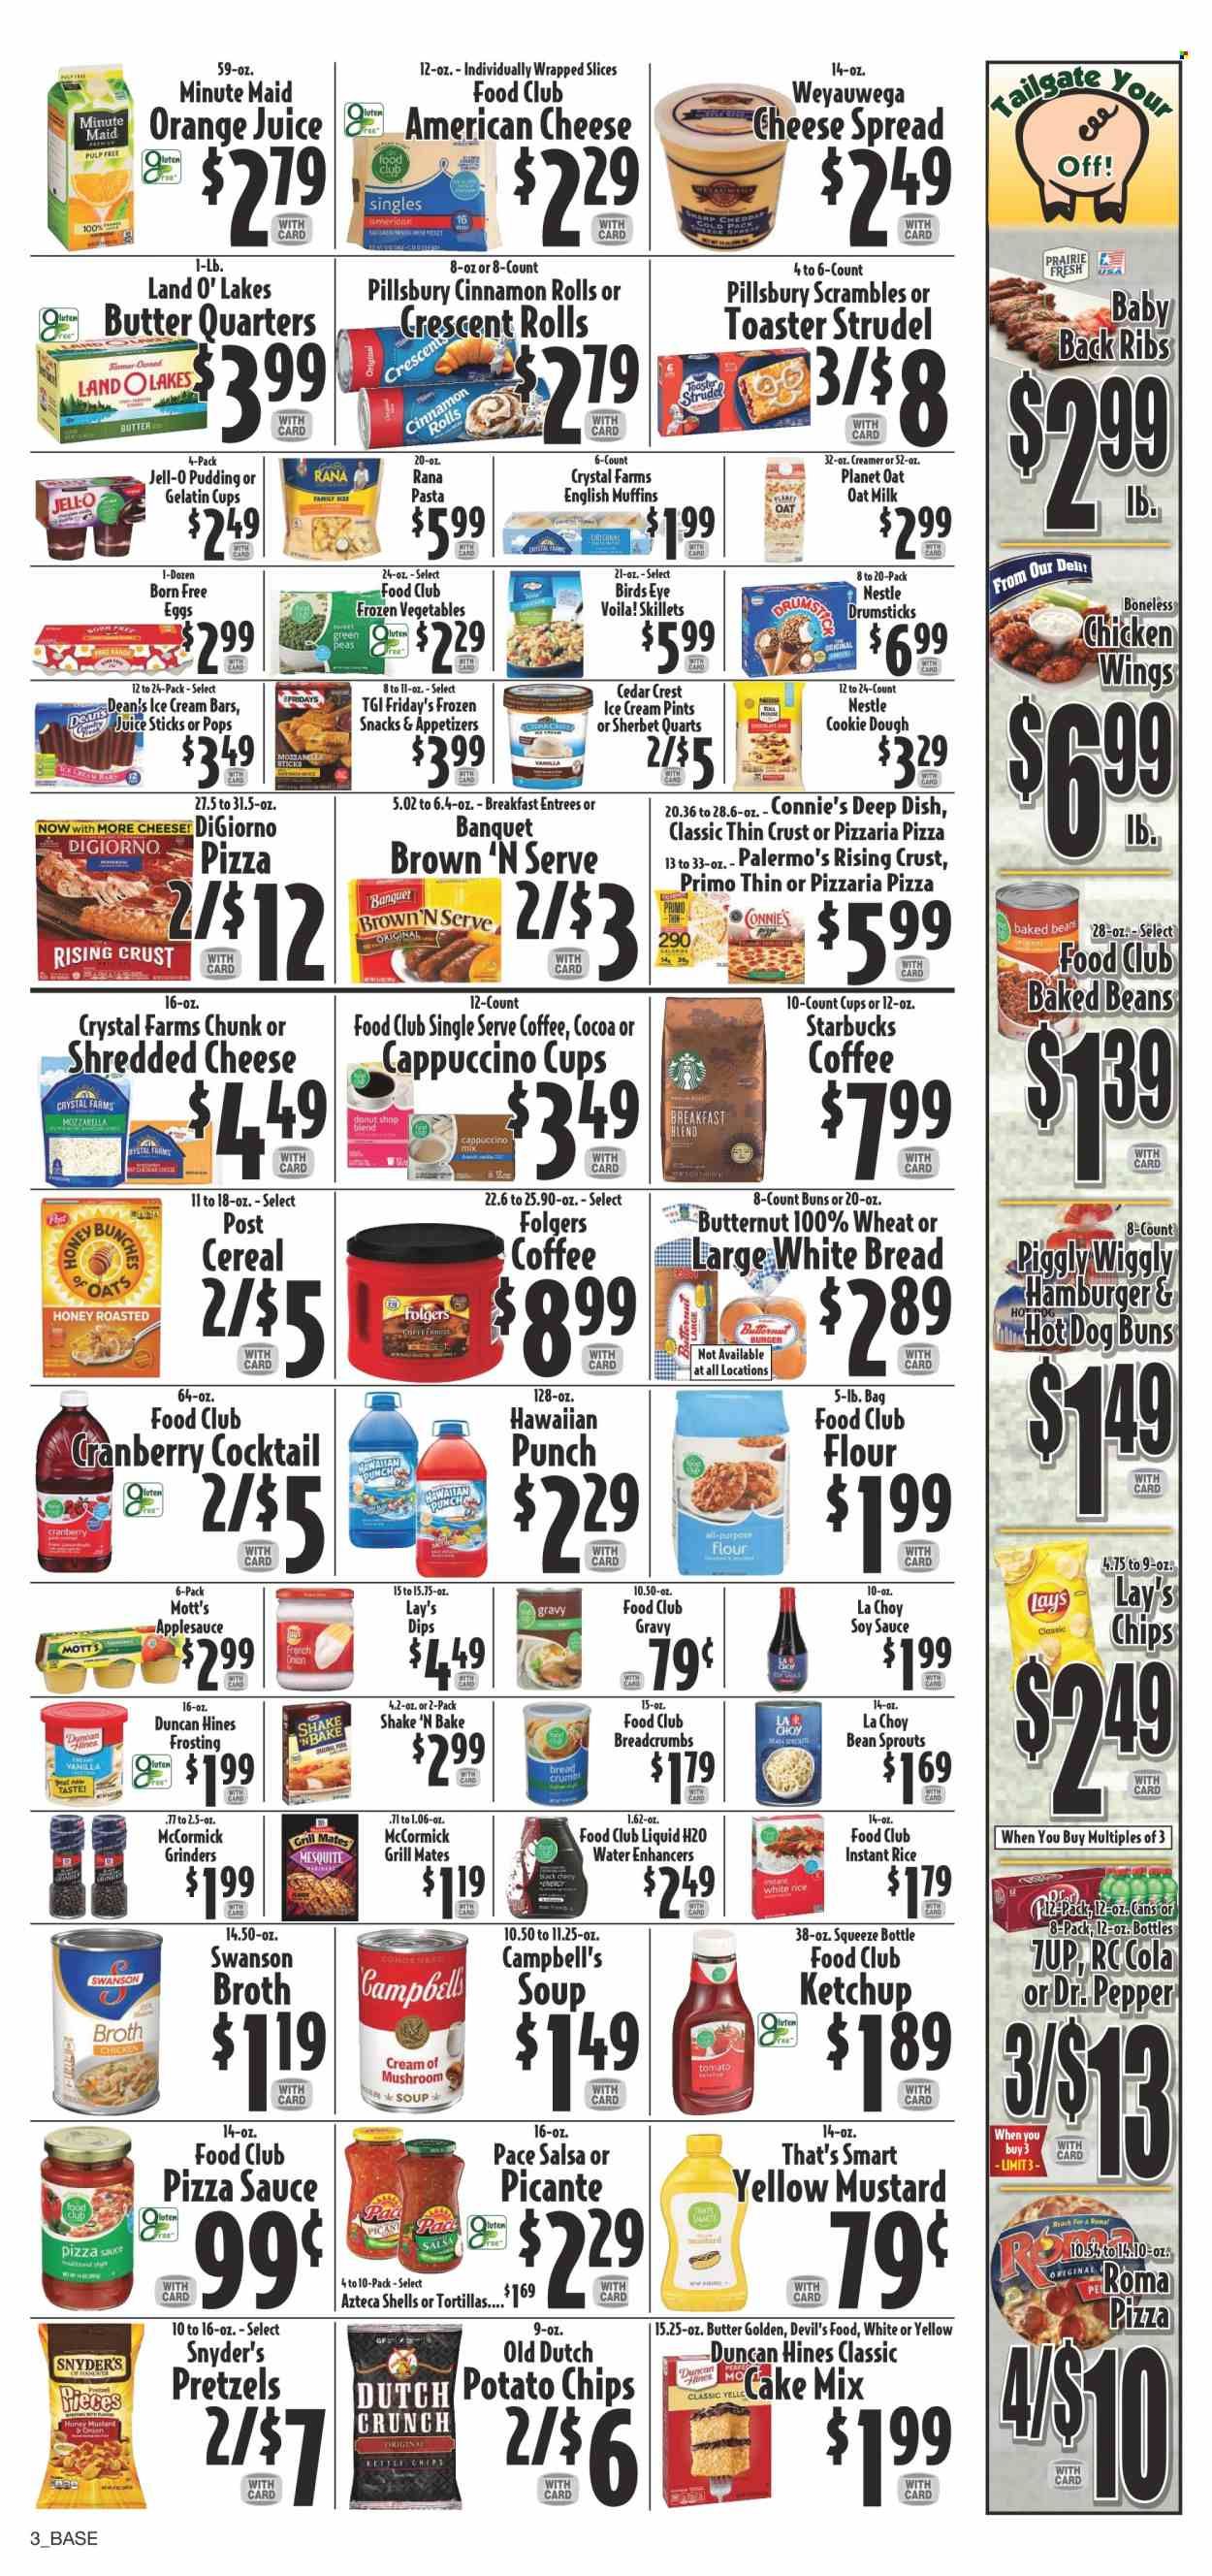 piggly wiggly milwaukee weekly ad